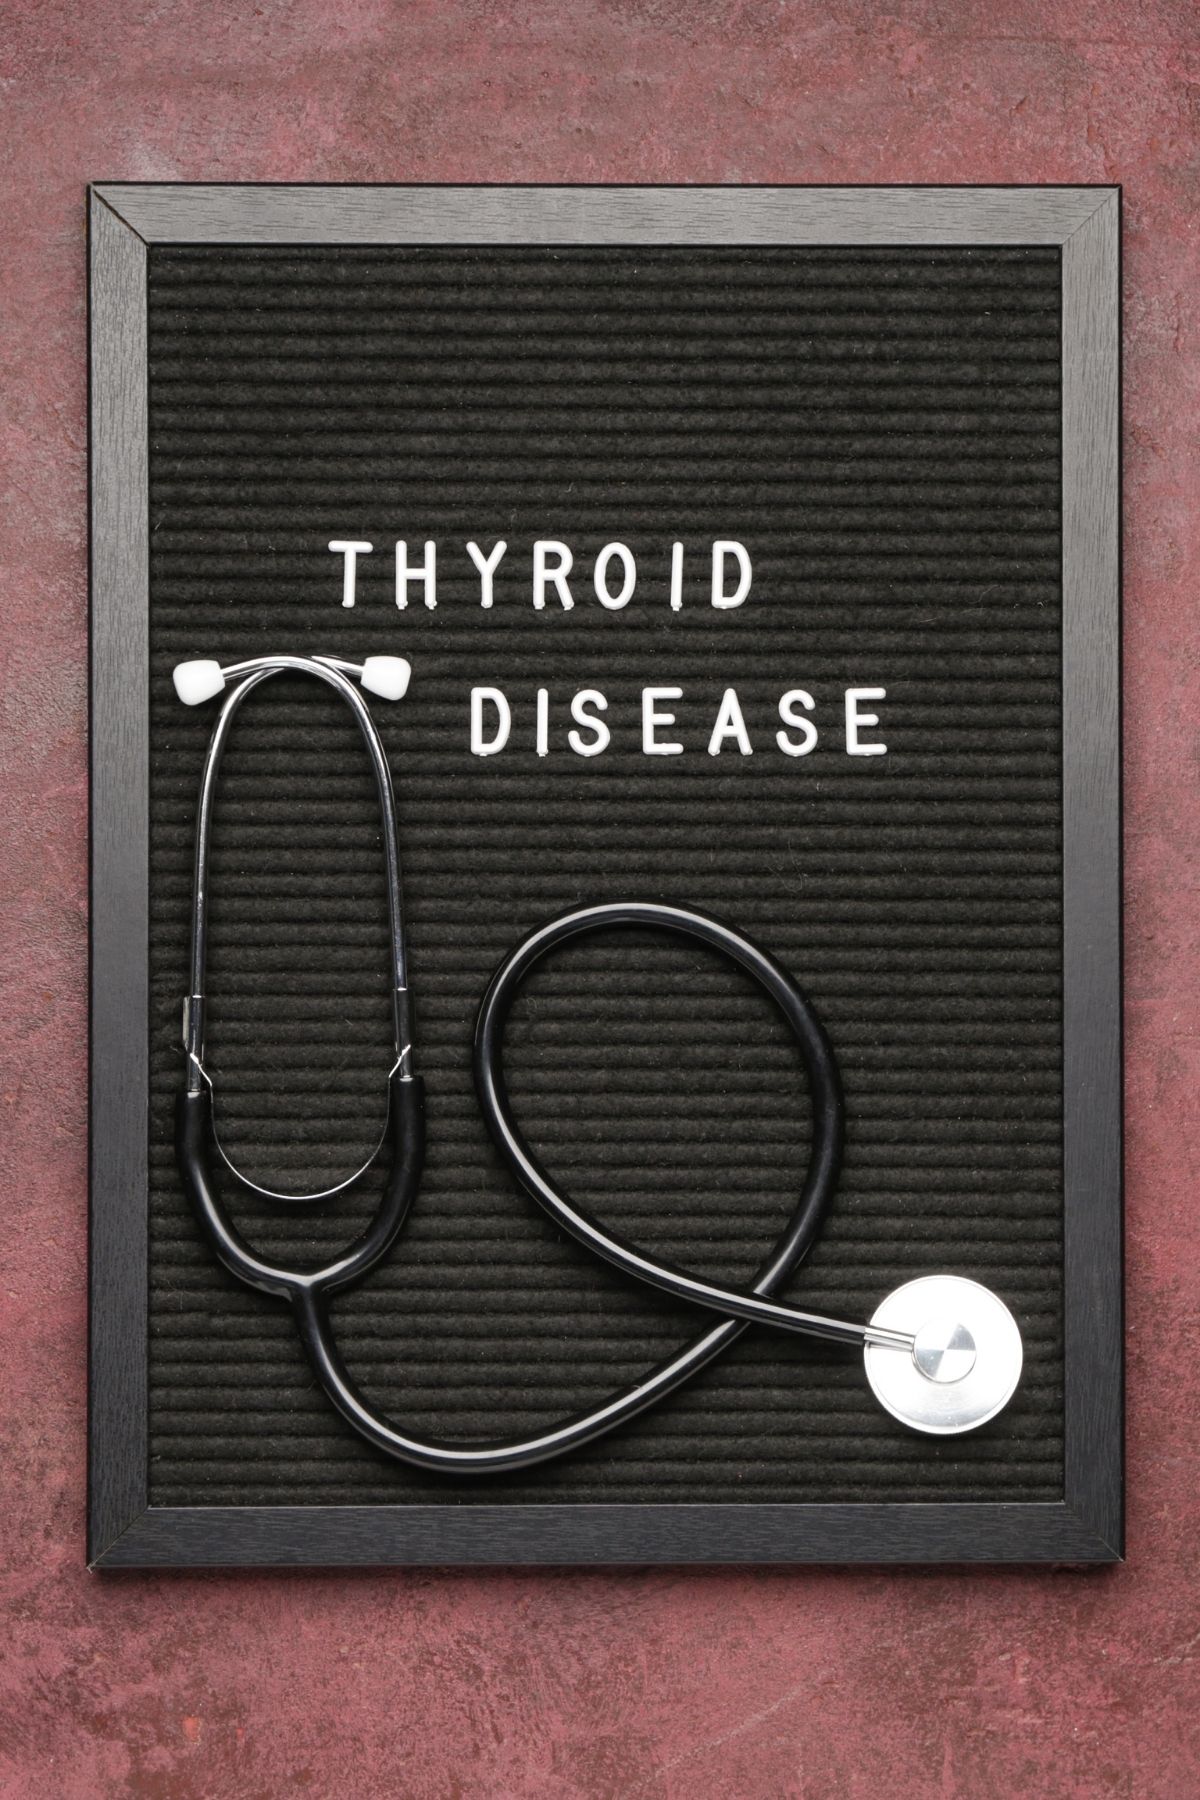 sign that says thyroid disease on it with a stethoscope.